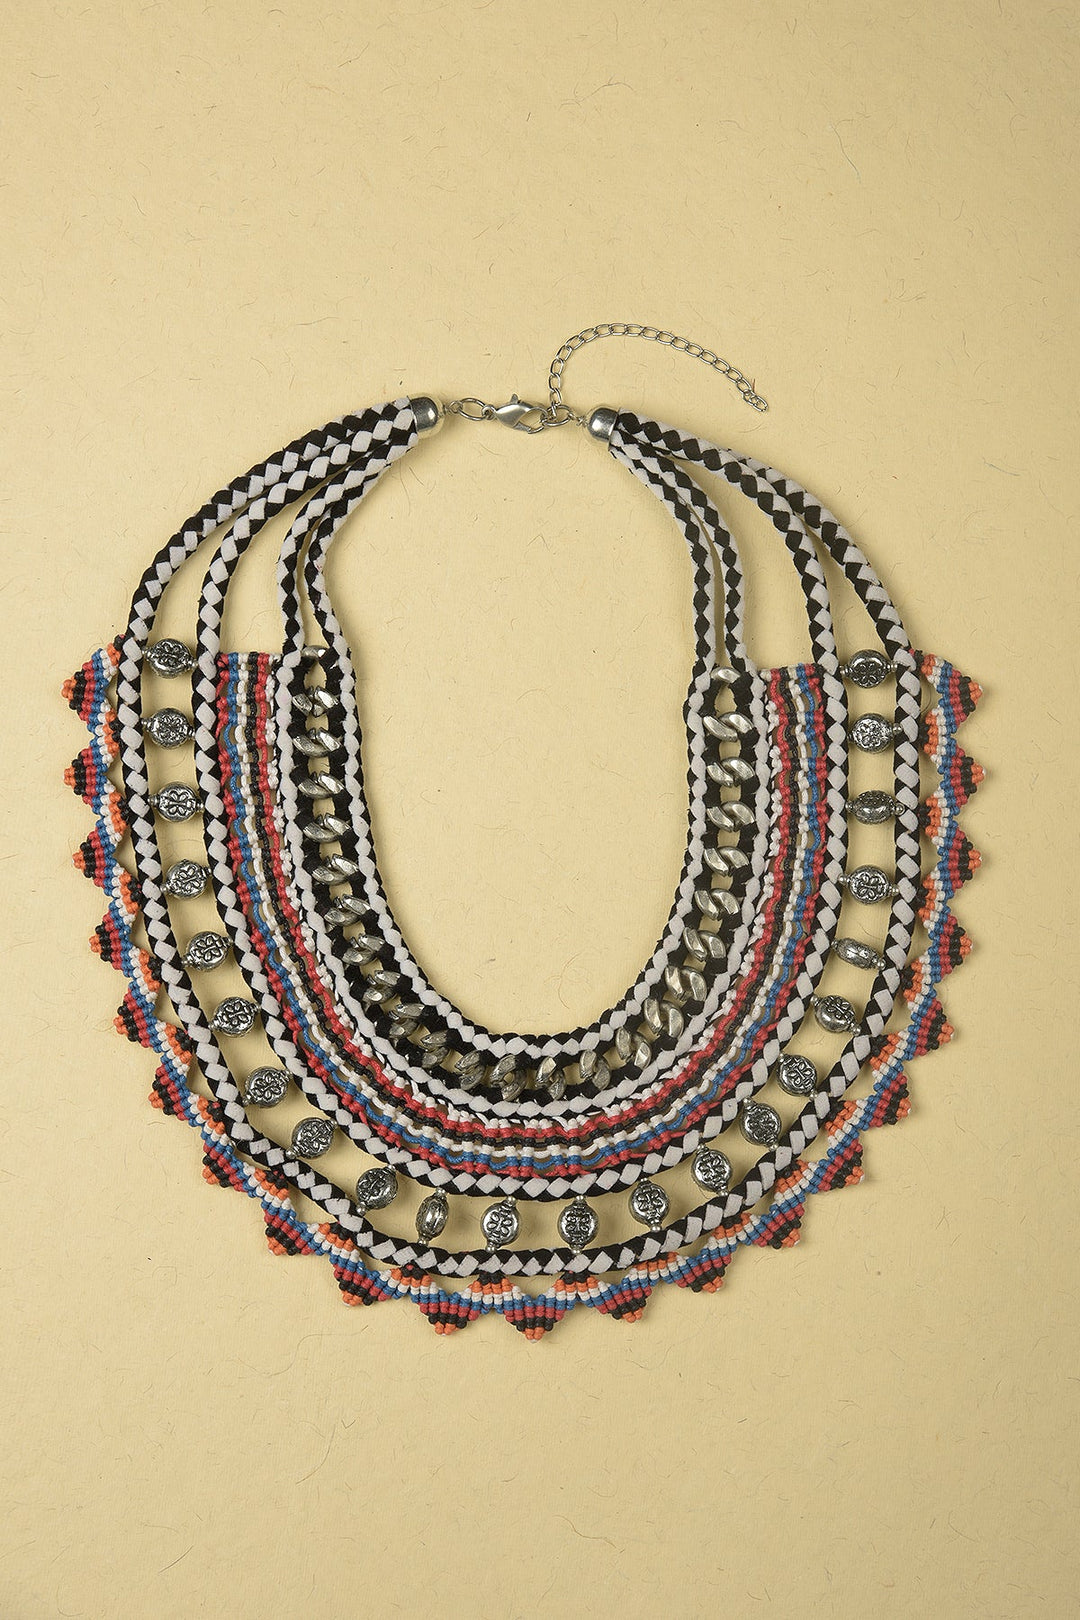 Necklace made of Silver Iron Chains, Beads, Suede and Multicolour Threads